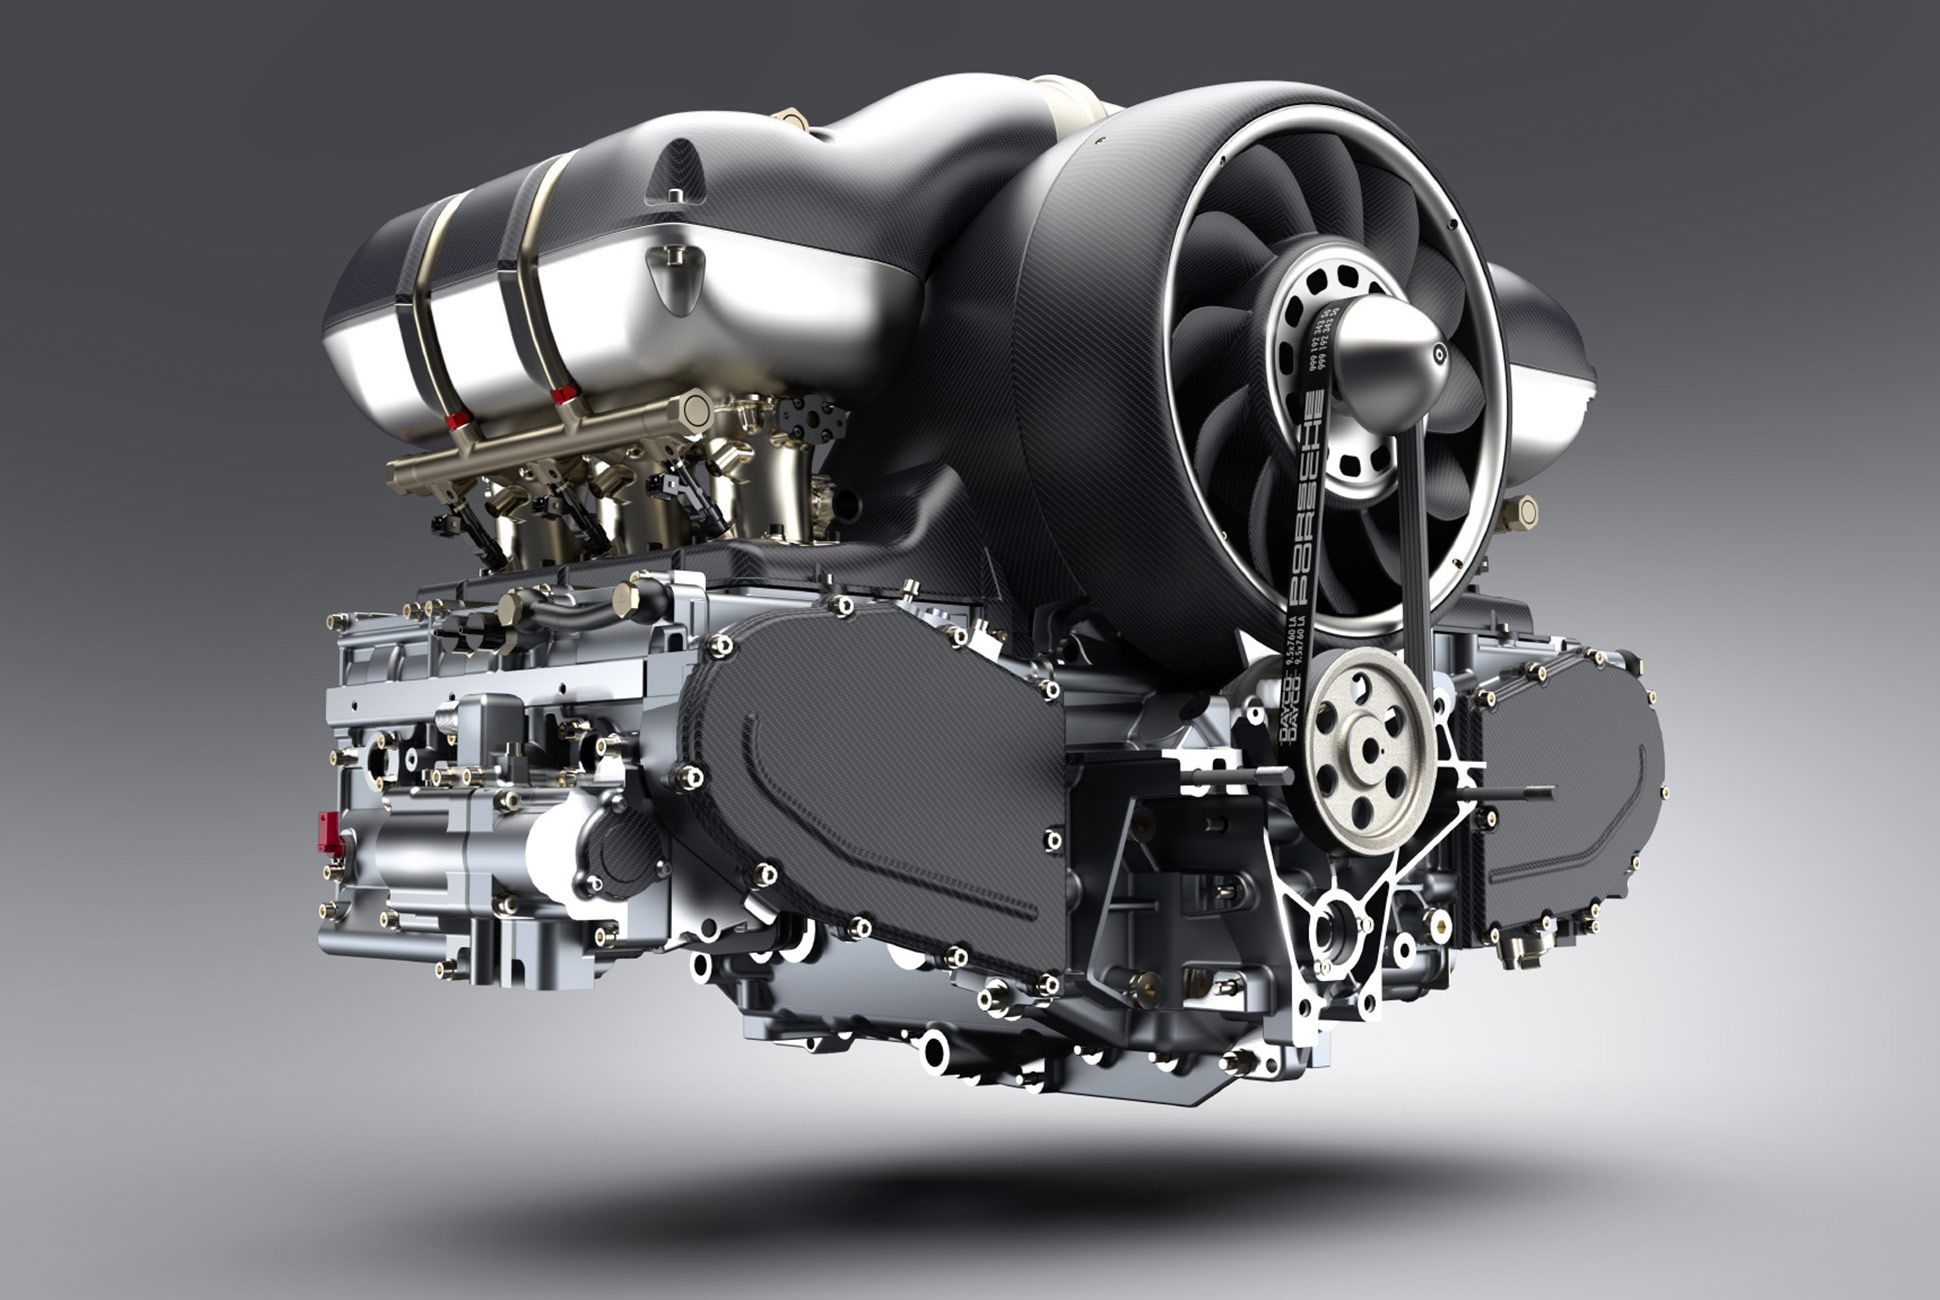 Combustion engines